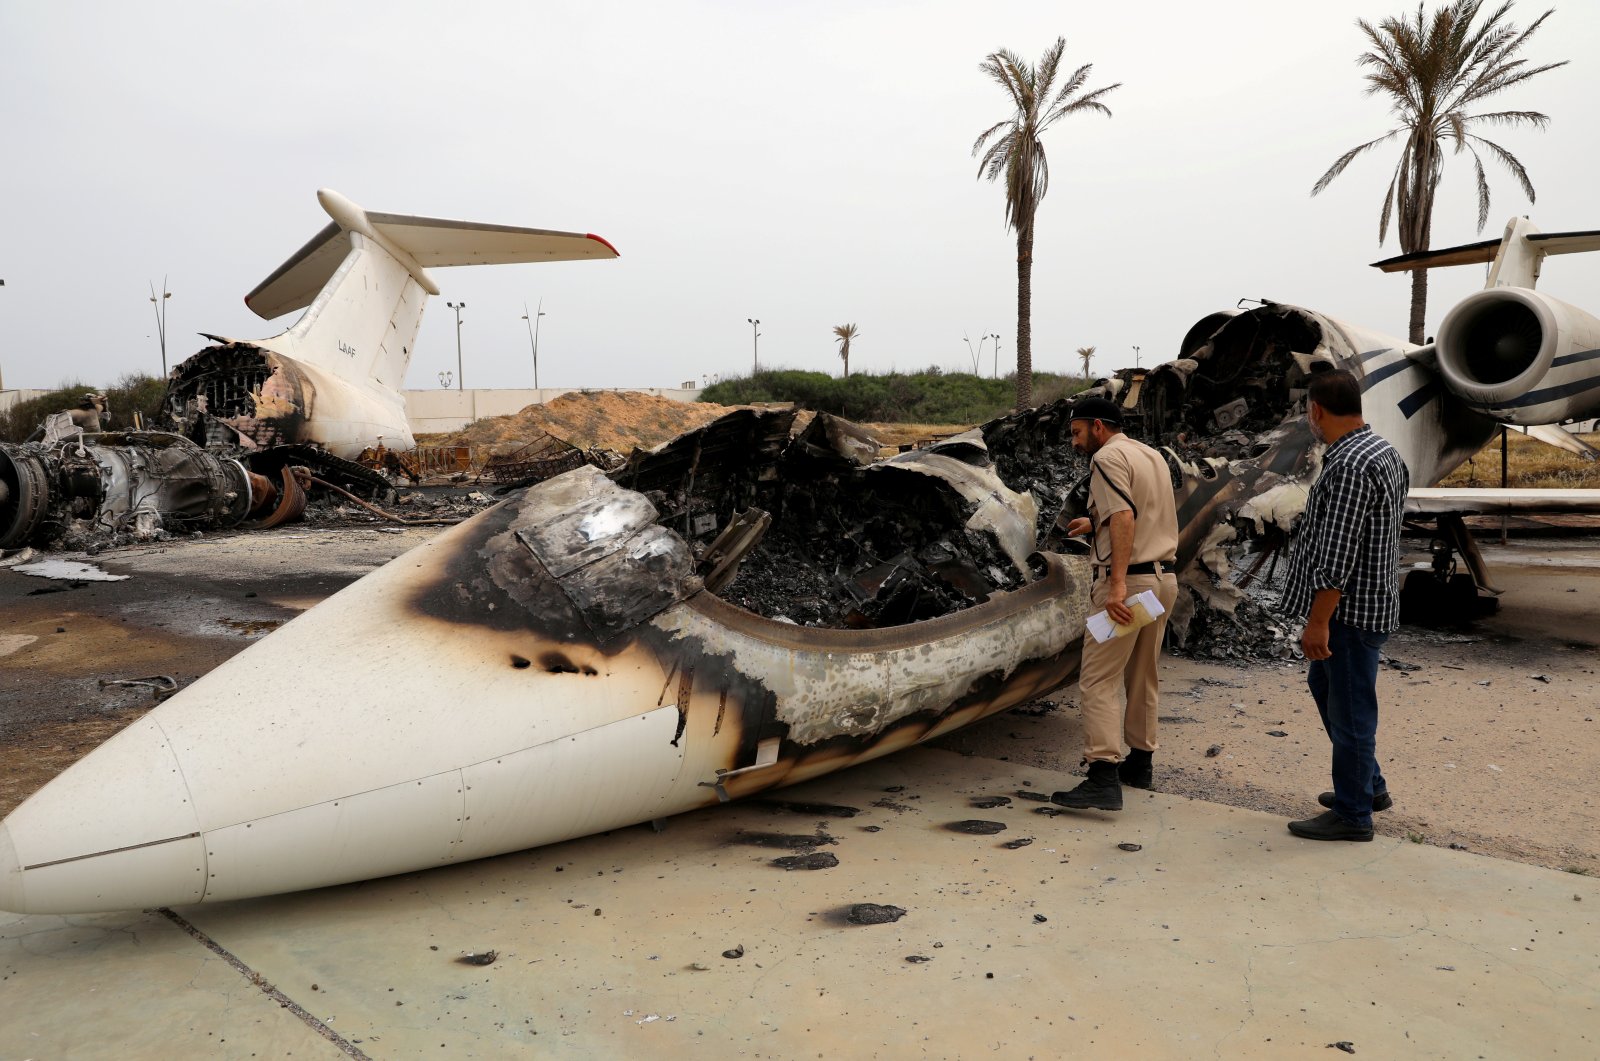 A policeman and a man inspect a passenger plane damaged by shelling at Mitiga airport in Tripoli, Libya, May 10, 2020. (Reuters Photo)